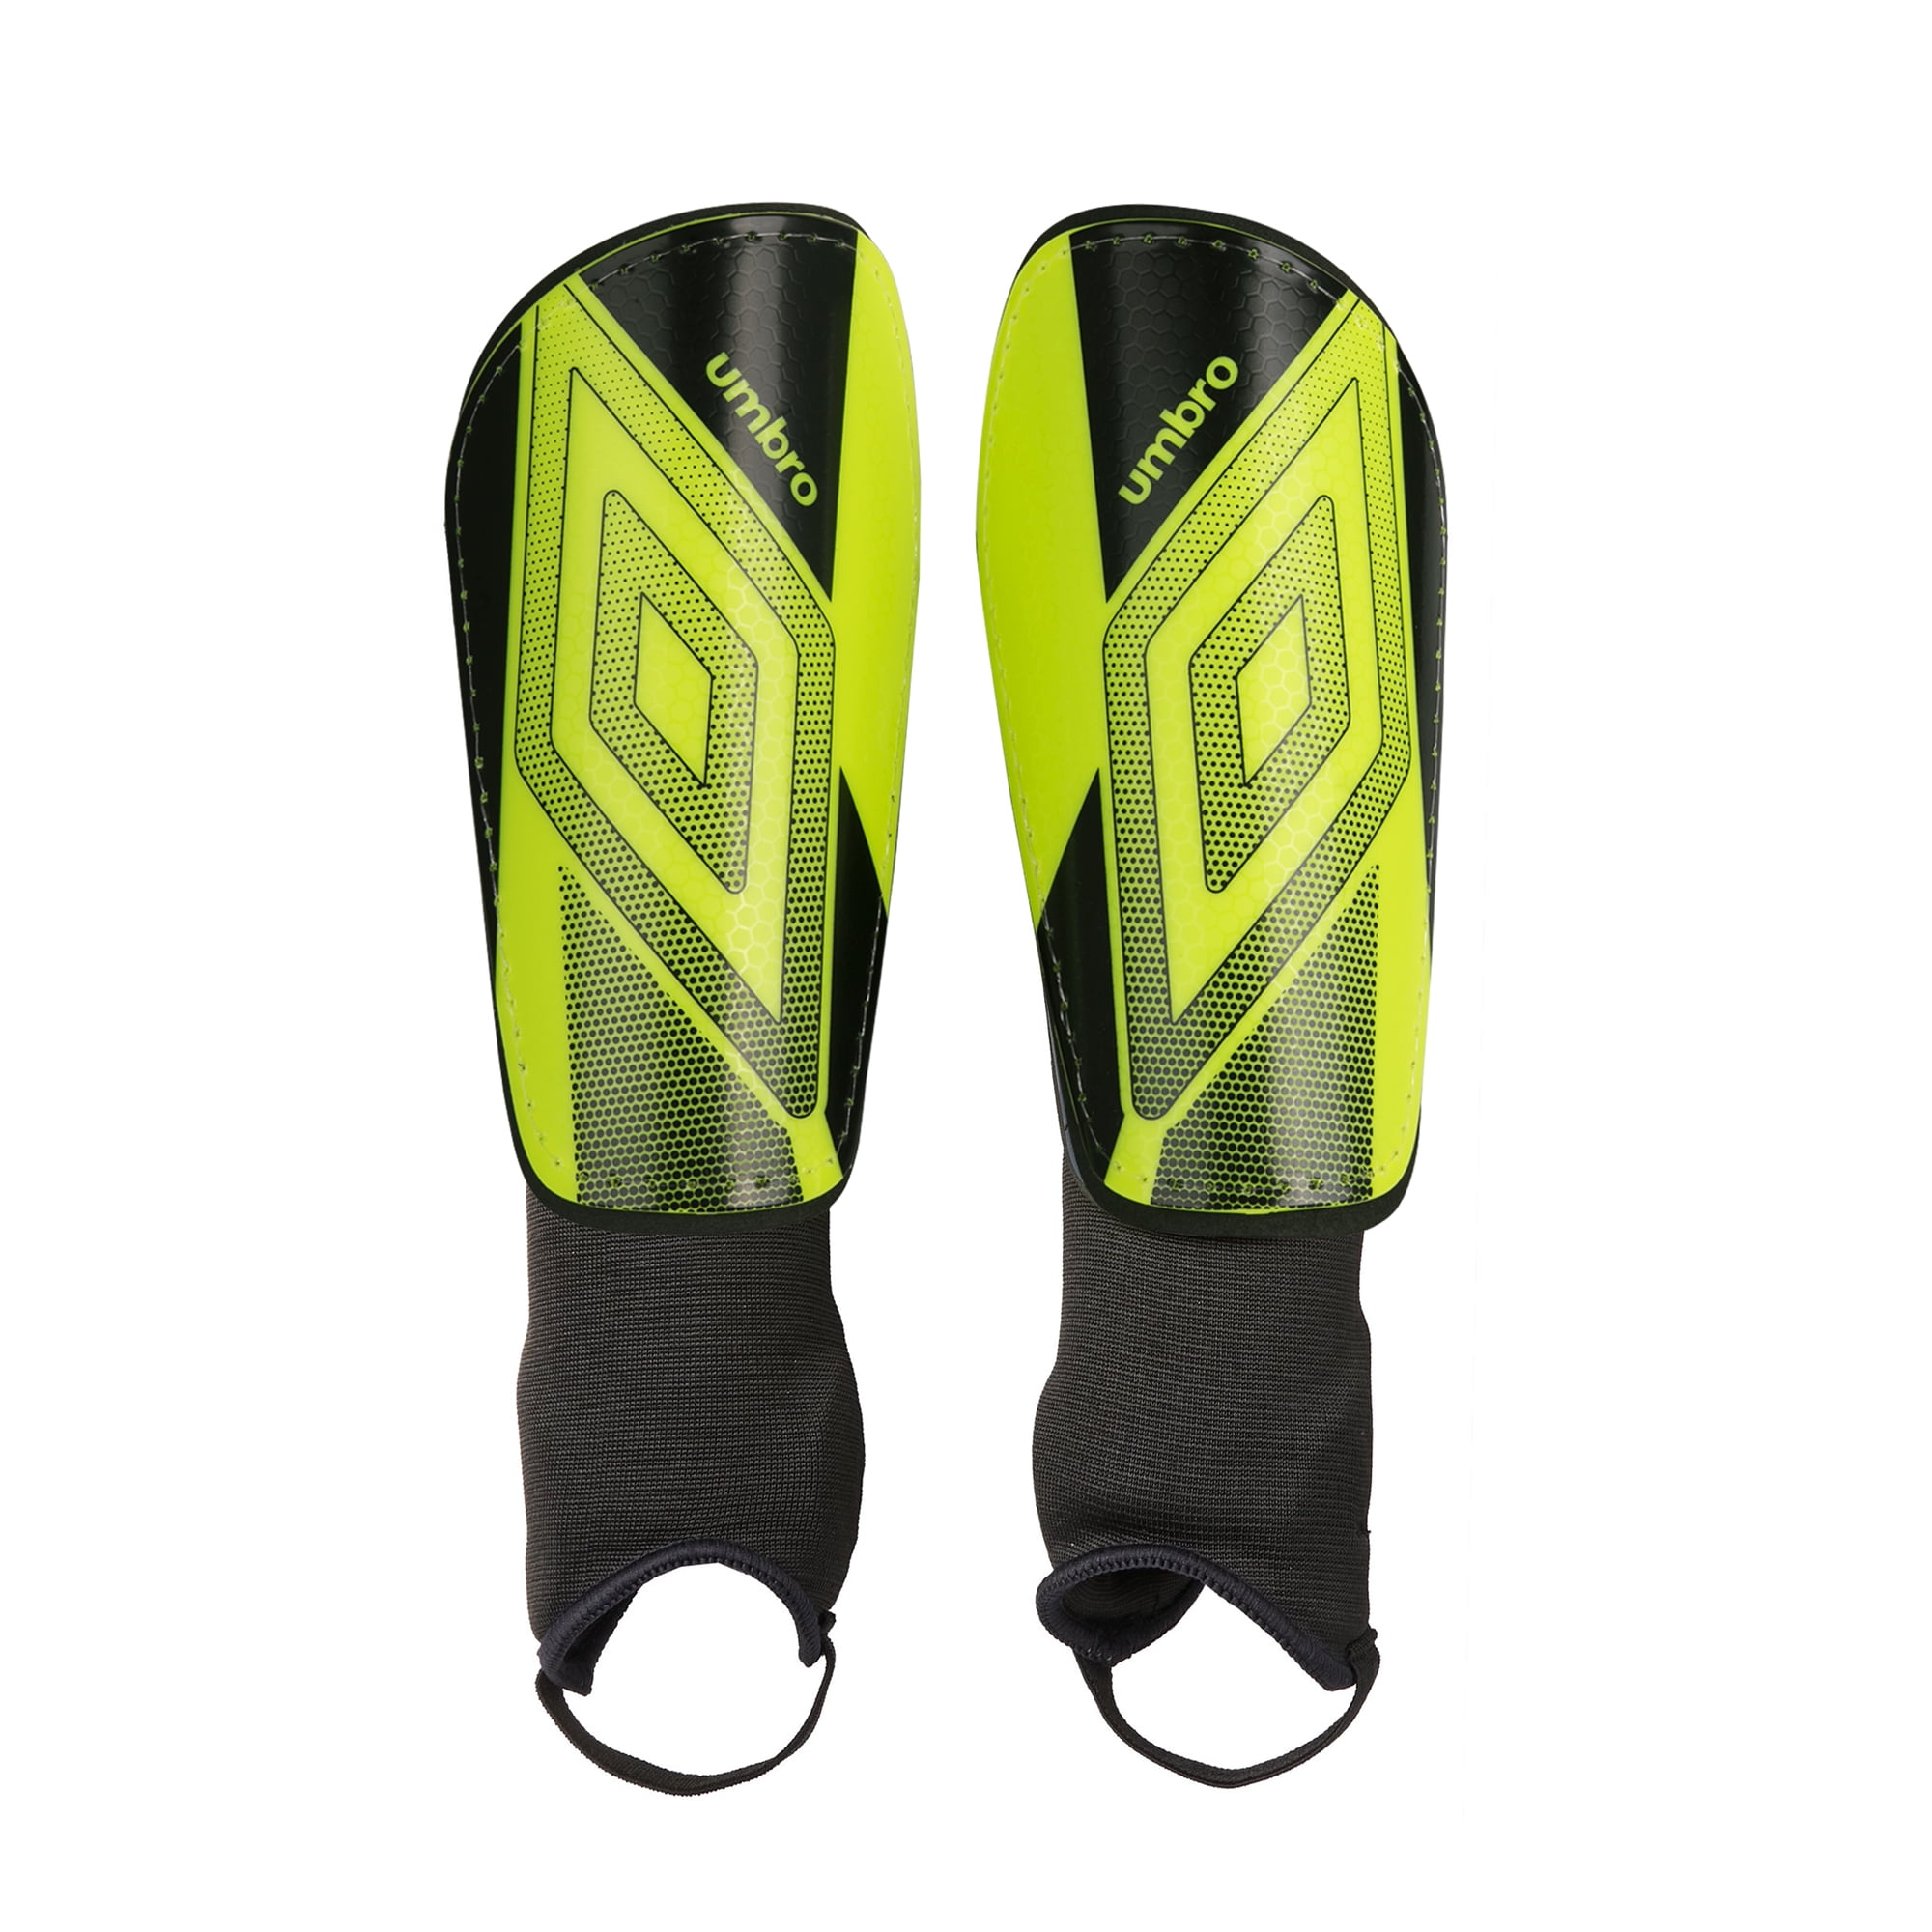 Details about   Umbro Youth Soccer Shin Guard Neo Cup Size Small for Youth 3' 11" to 4' 7"  NEW 